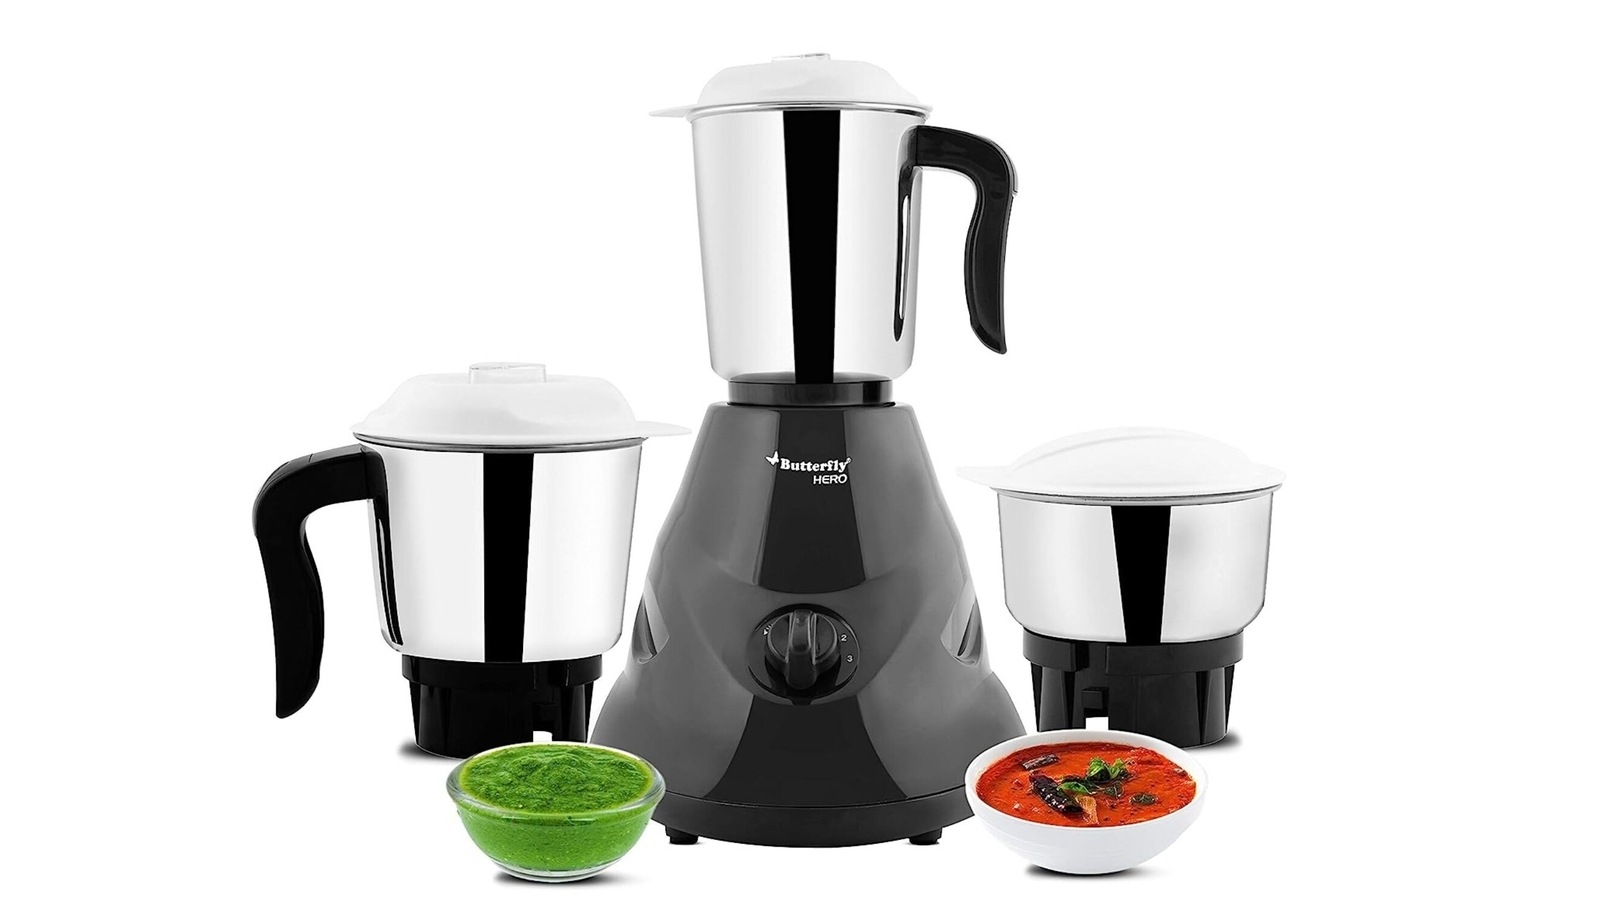 Great Indian Festival: Top 10 Mixer Grinders To Make